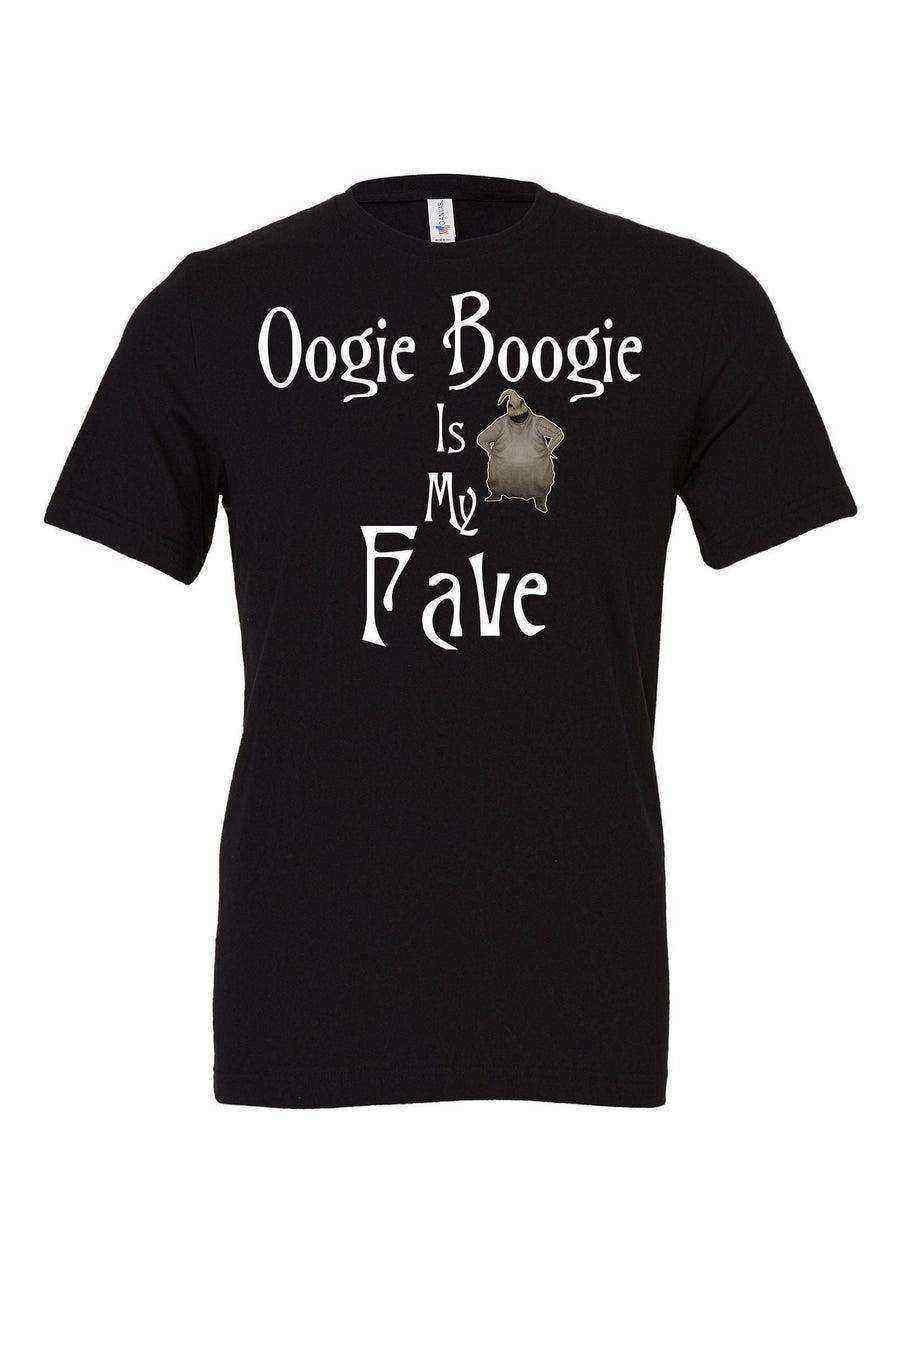 Youth | Oogie Boogie is My Fave - Dylan's Tees